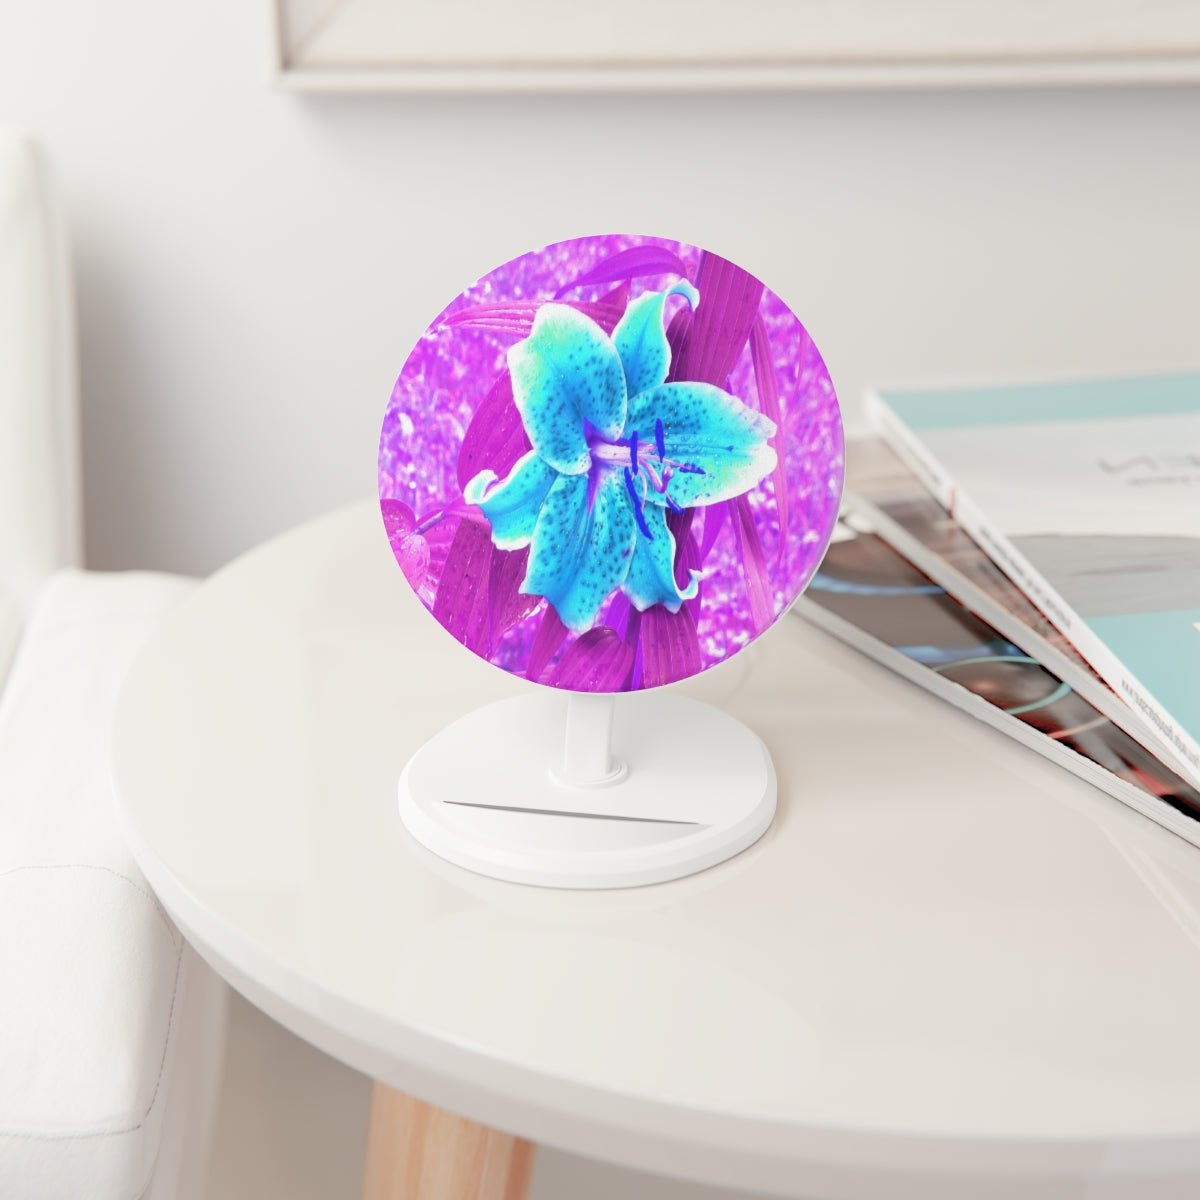 Induction Charger, Pretty Aqua Blue Stargazer Lily on Purple